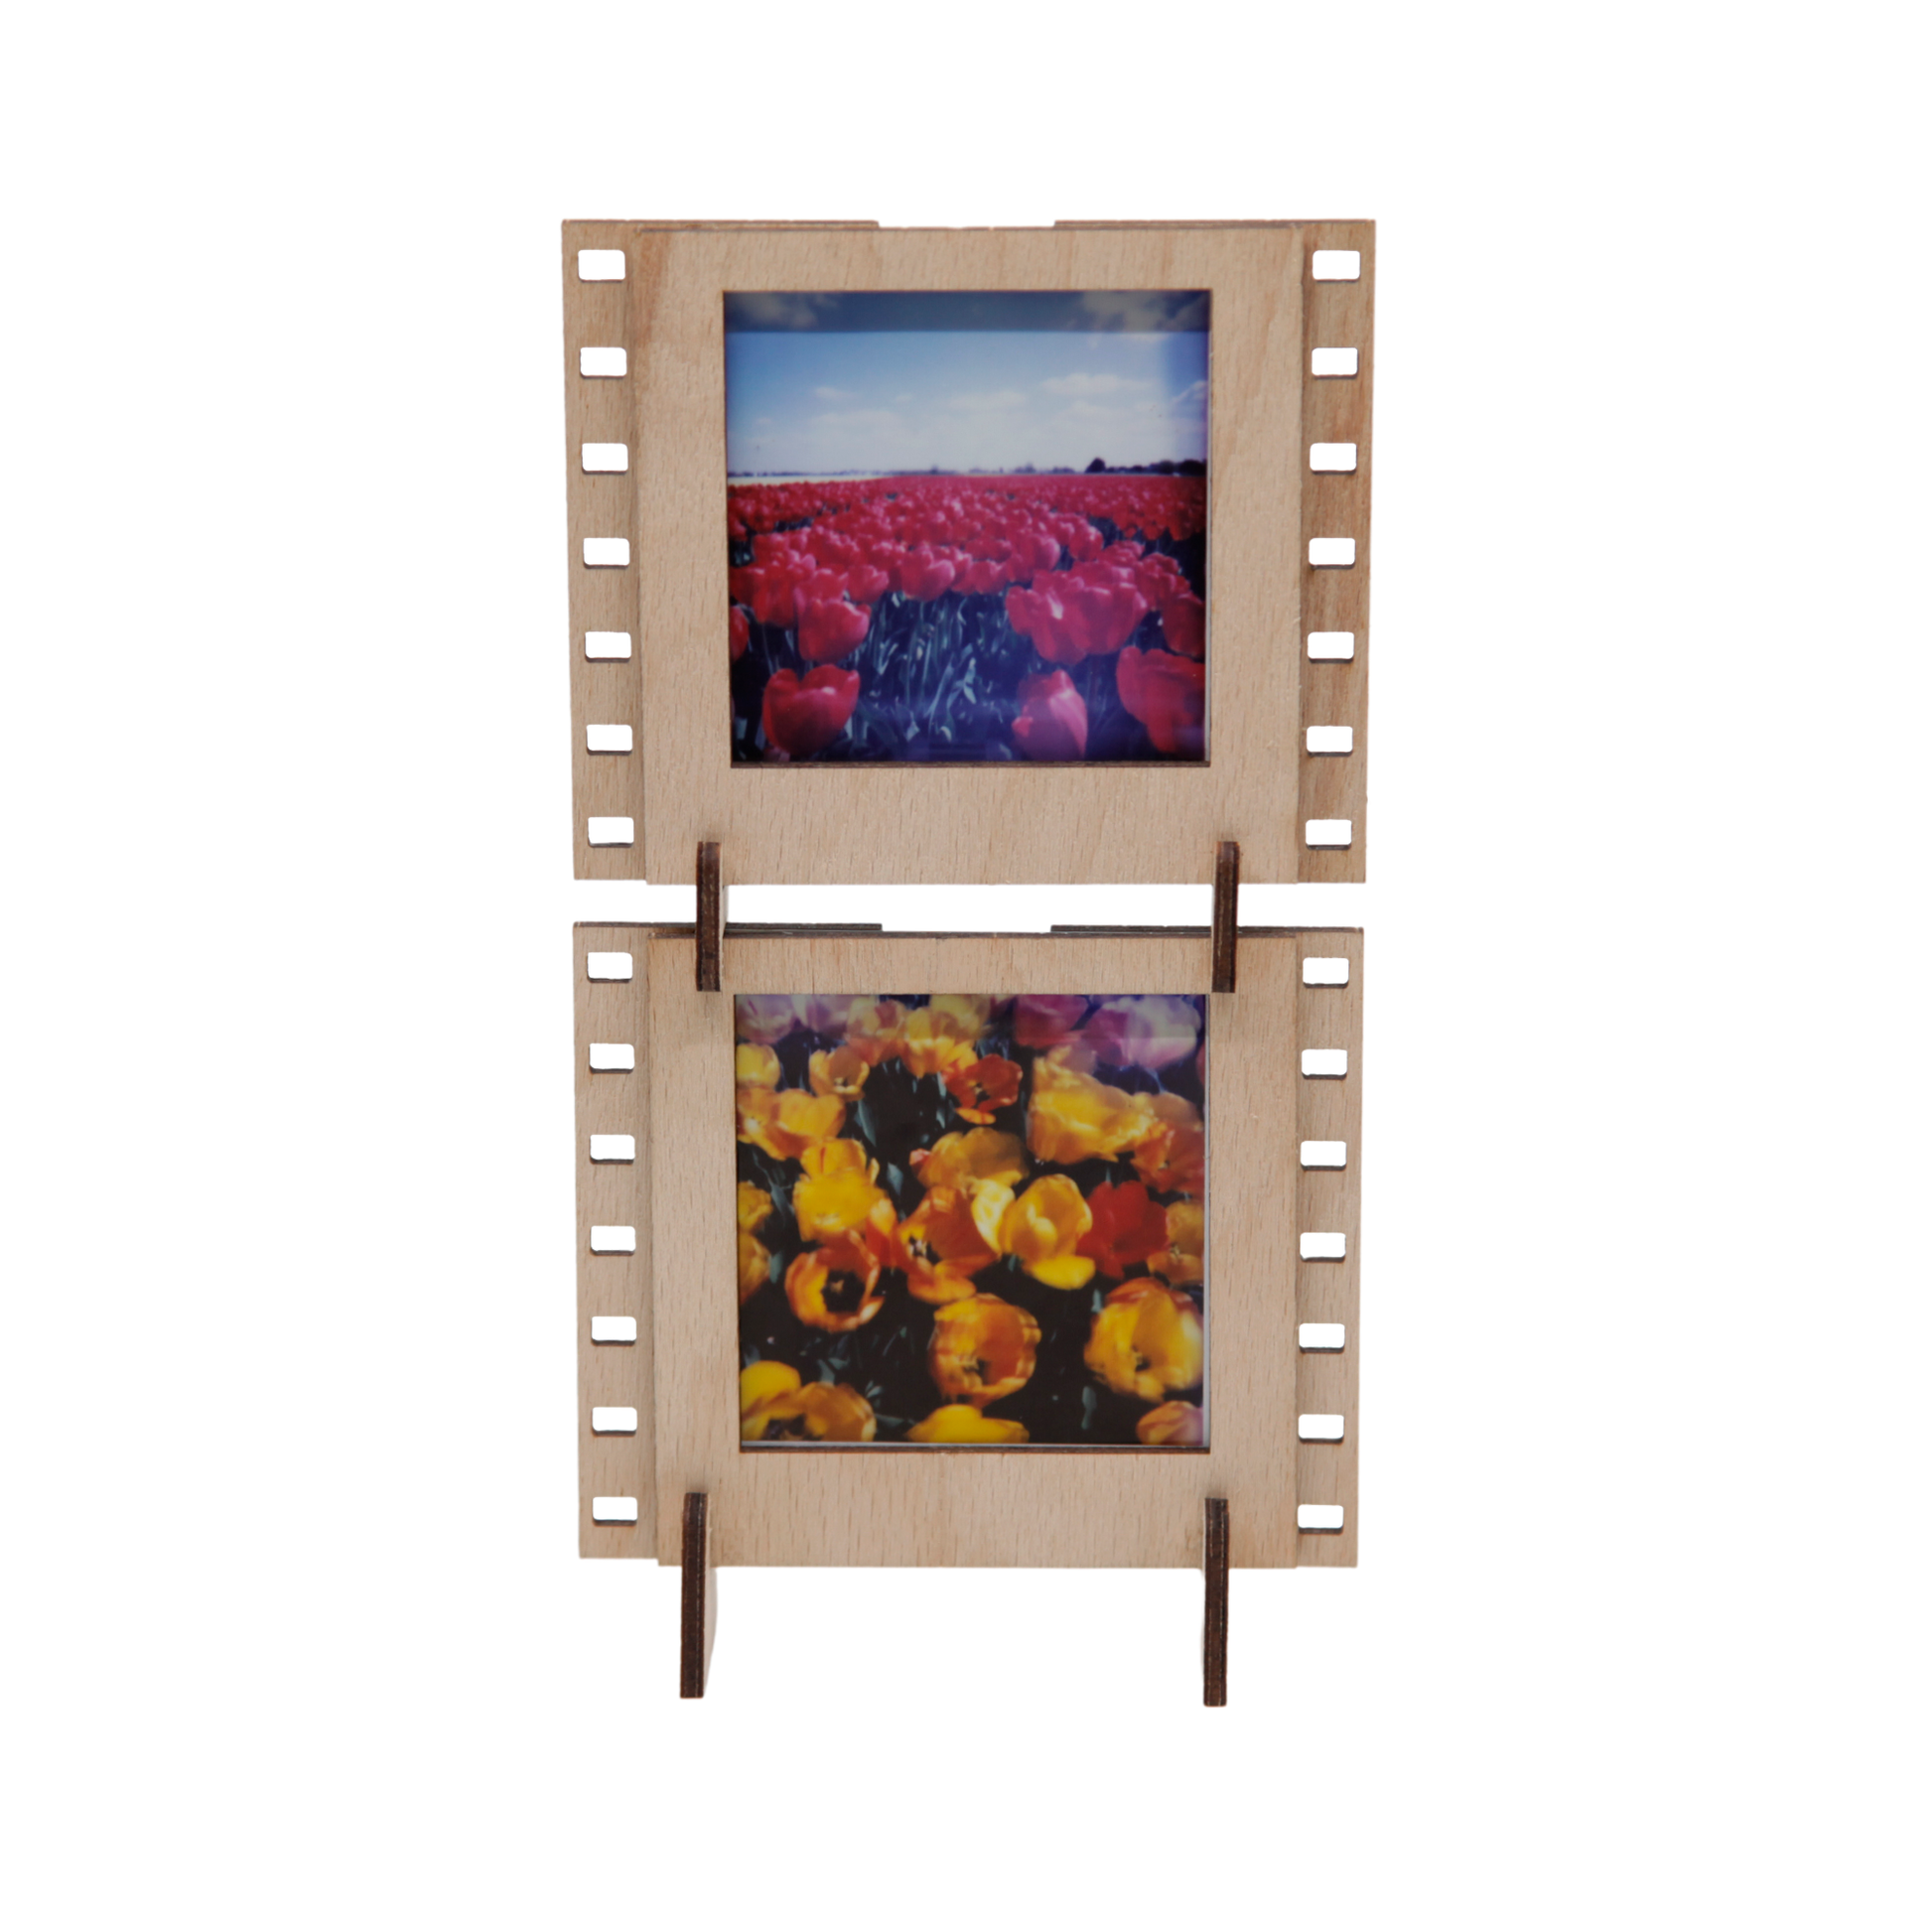  A set of two natural wood interconnectable Instax SQUARE film photo frames for instant SQUARE photos. 